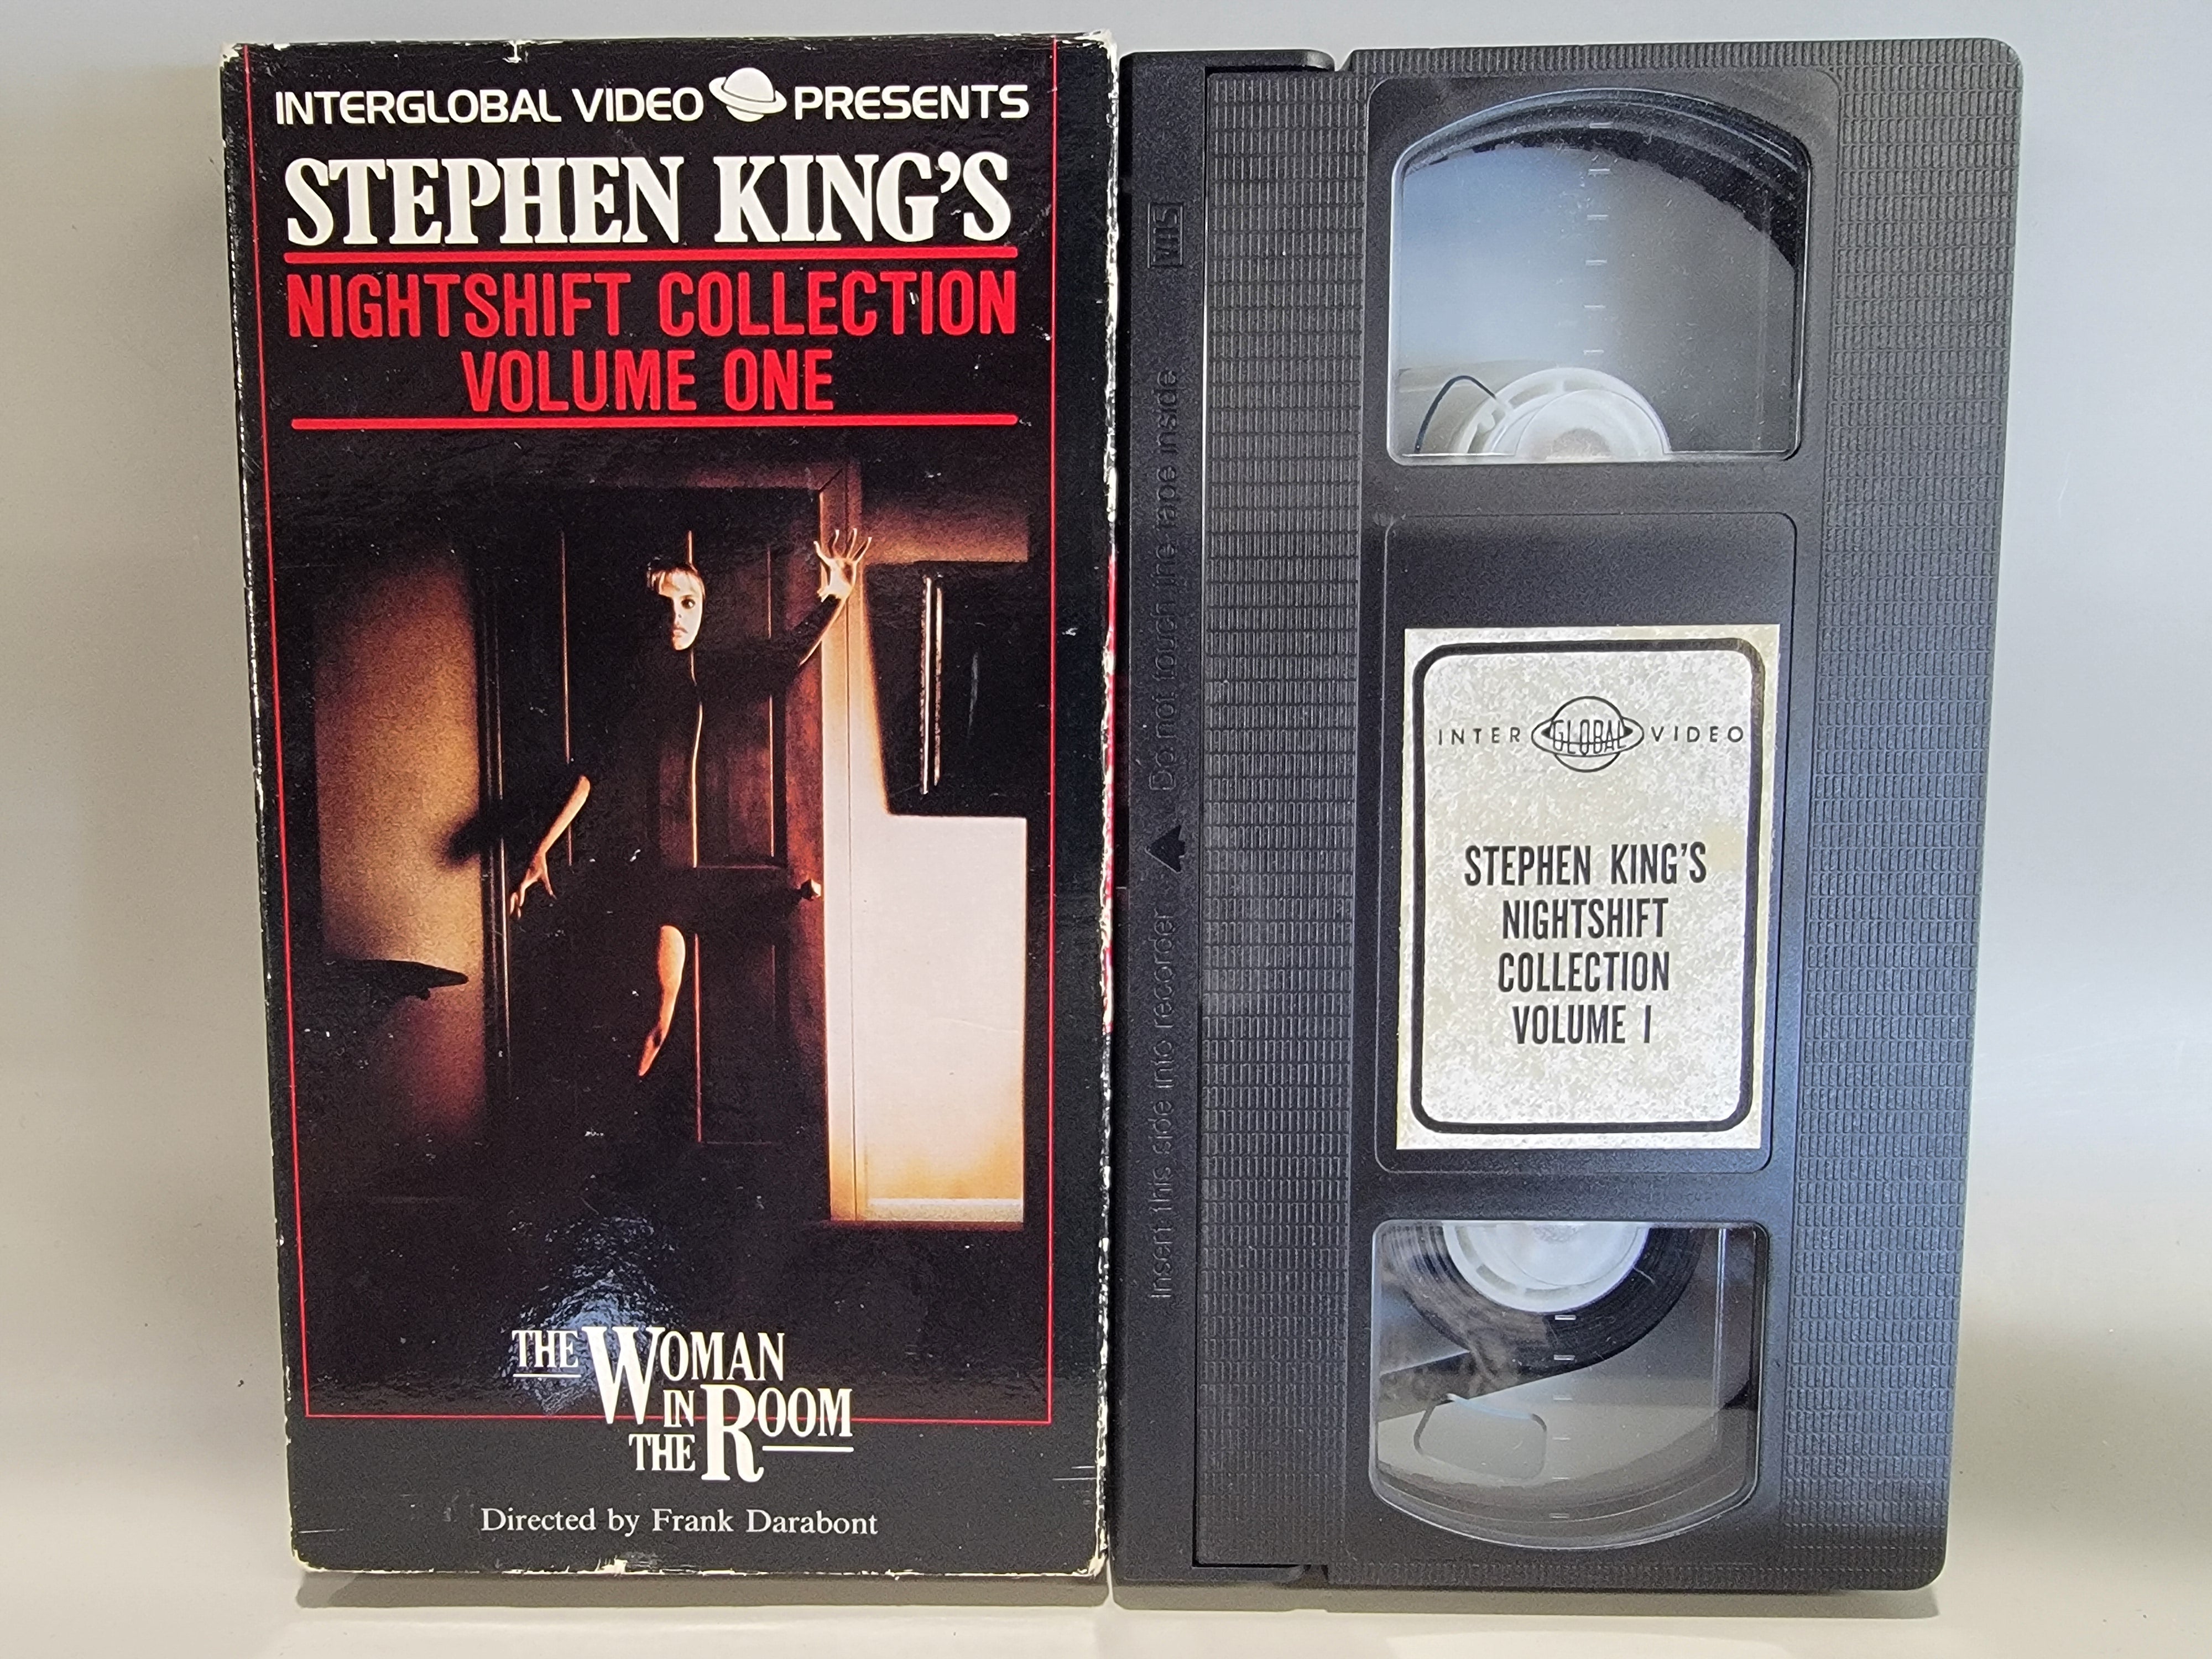 NIGHTSHIFT COLLECTION VOLUME ONE: THE WOMAN IN THE ROOM VHS [USED]